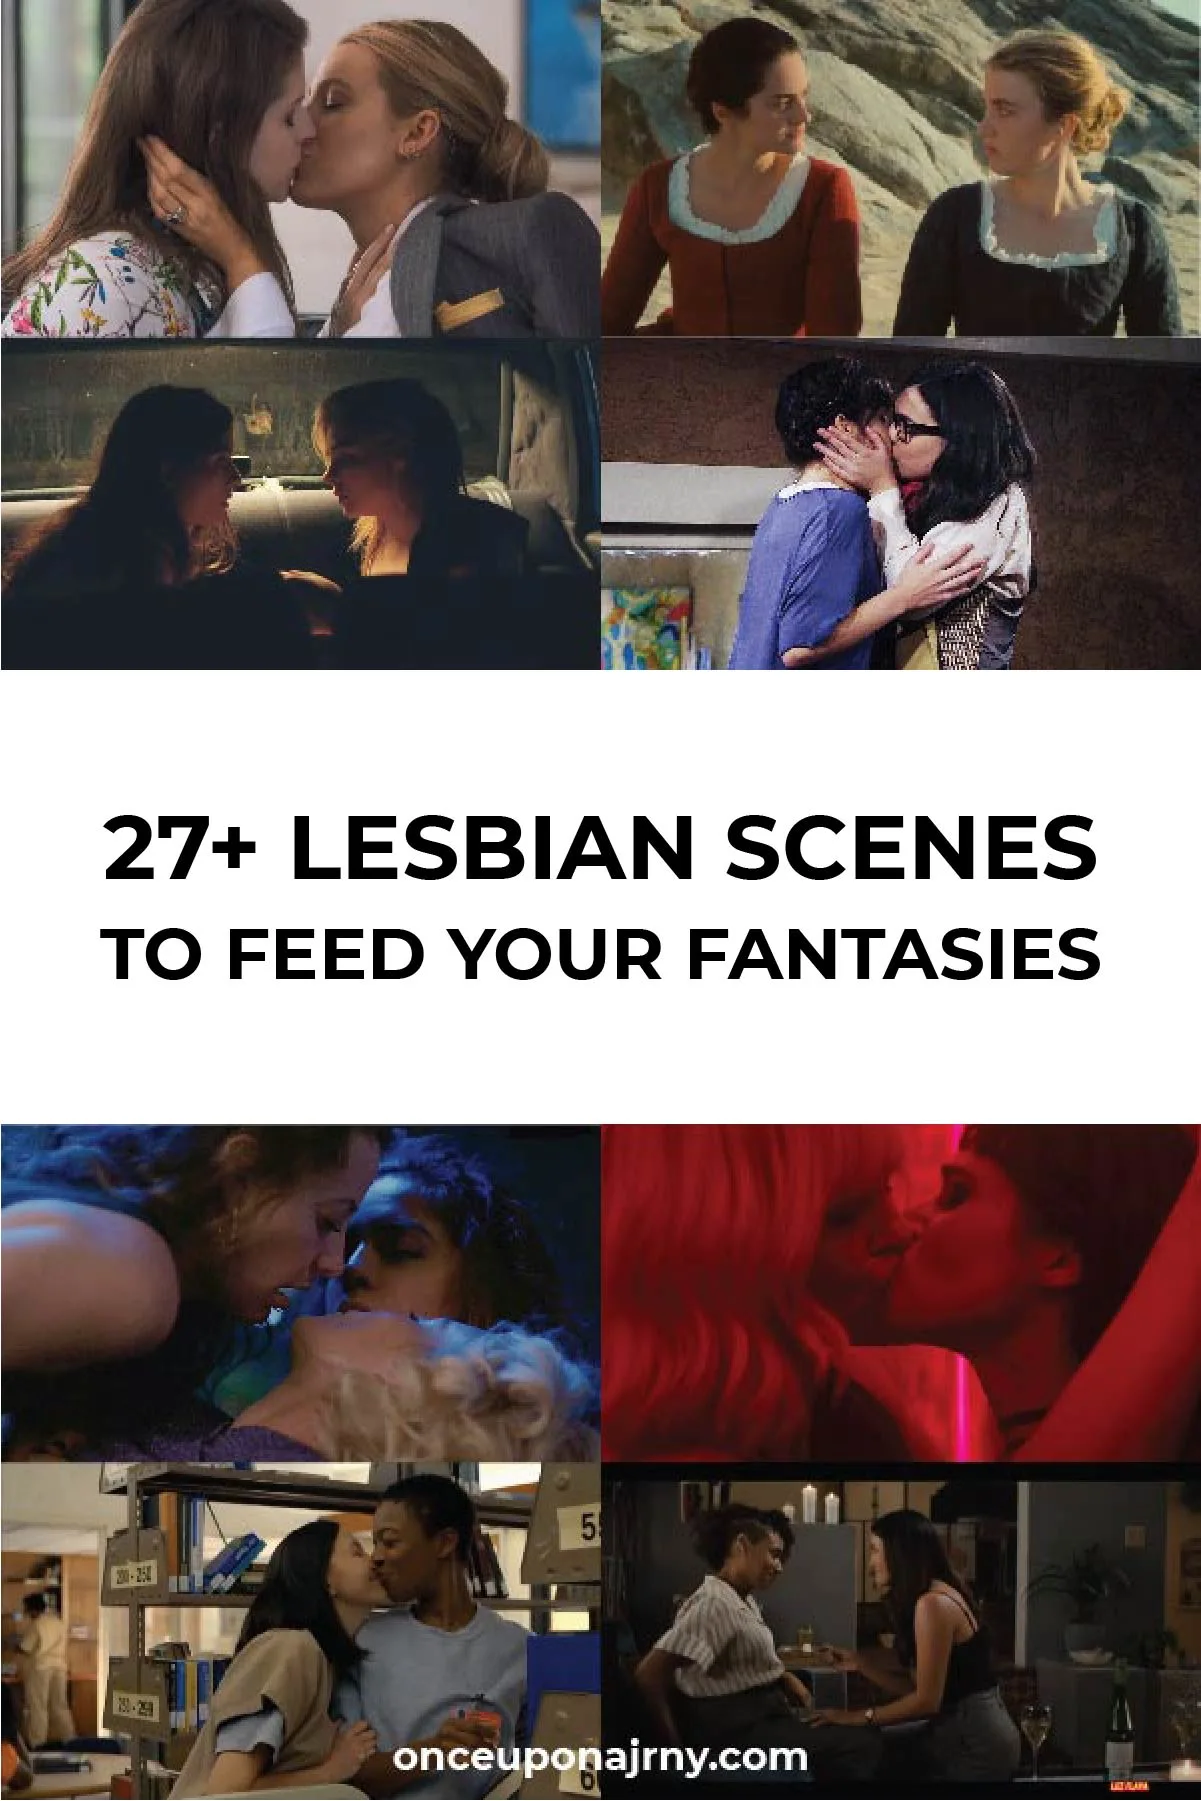 Lesbian scenes to feed your fantasies